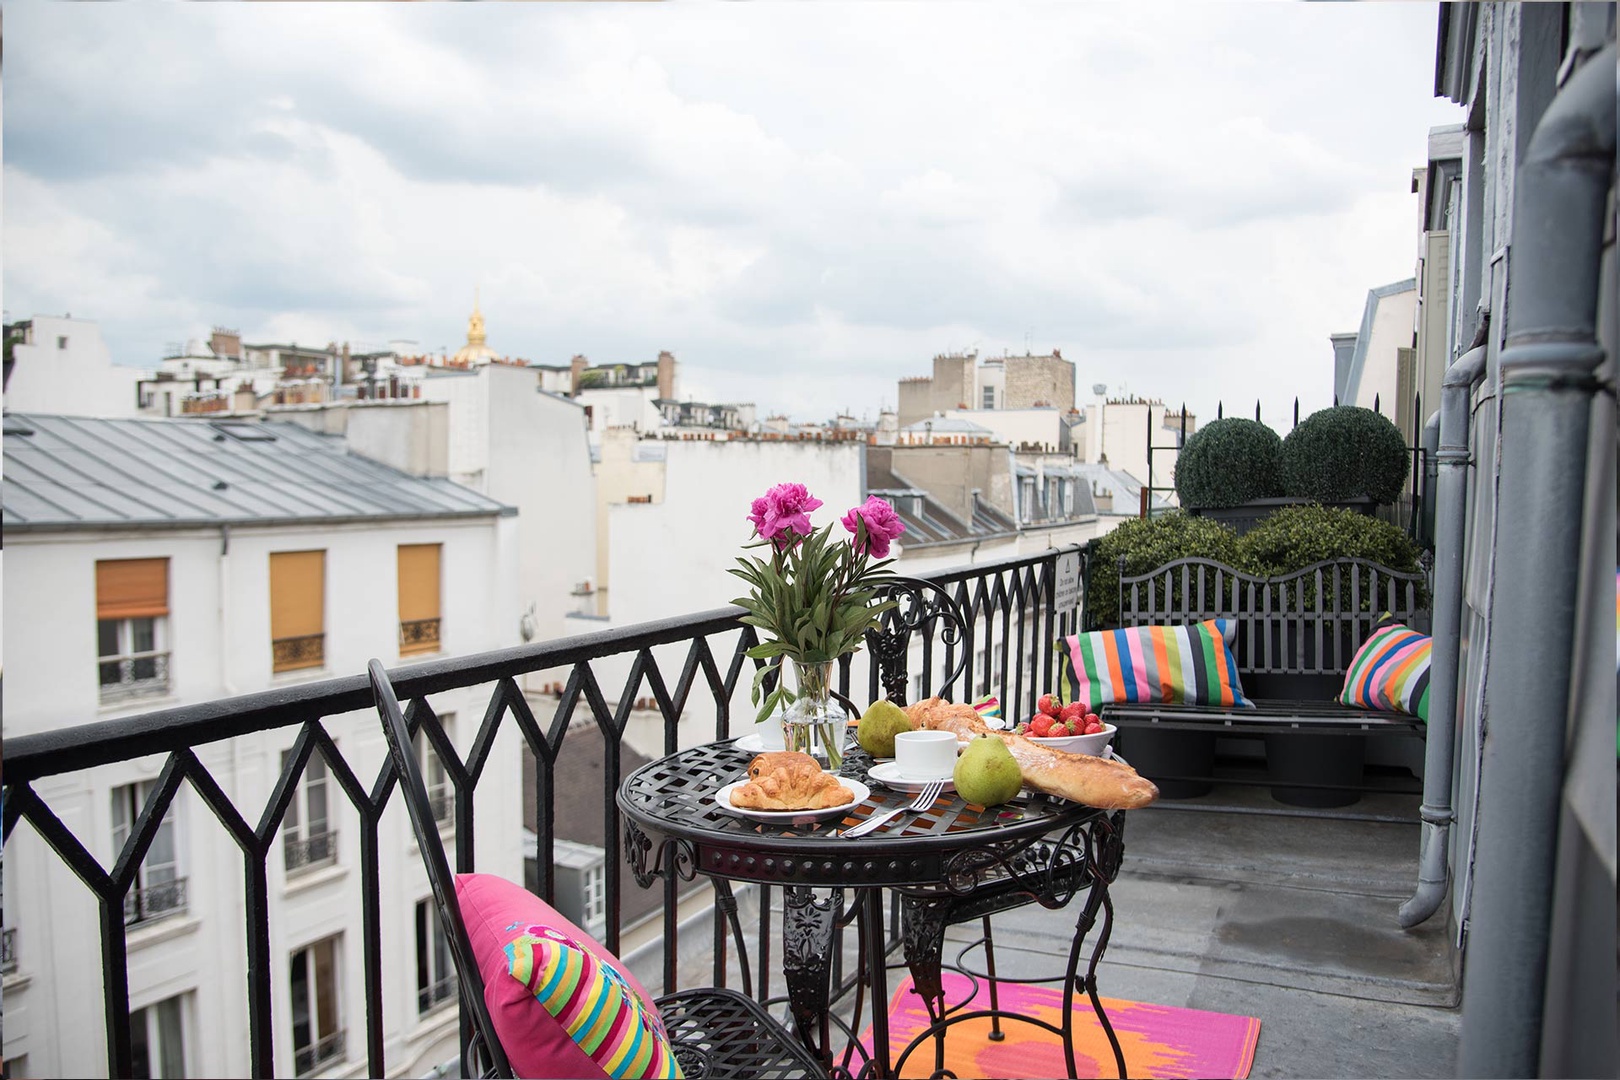 Enjoy the lovely private outdoor balcony during your stay!